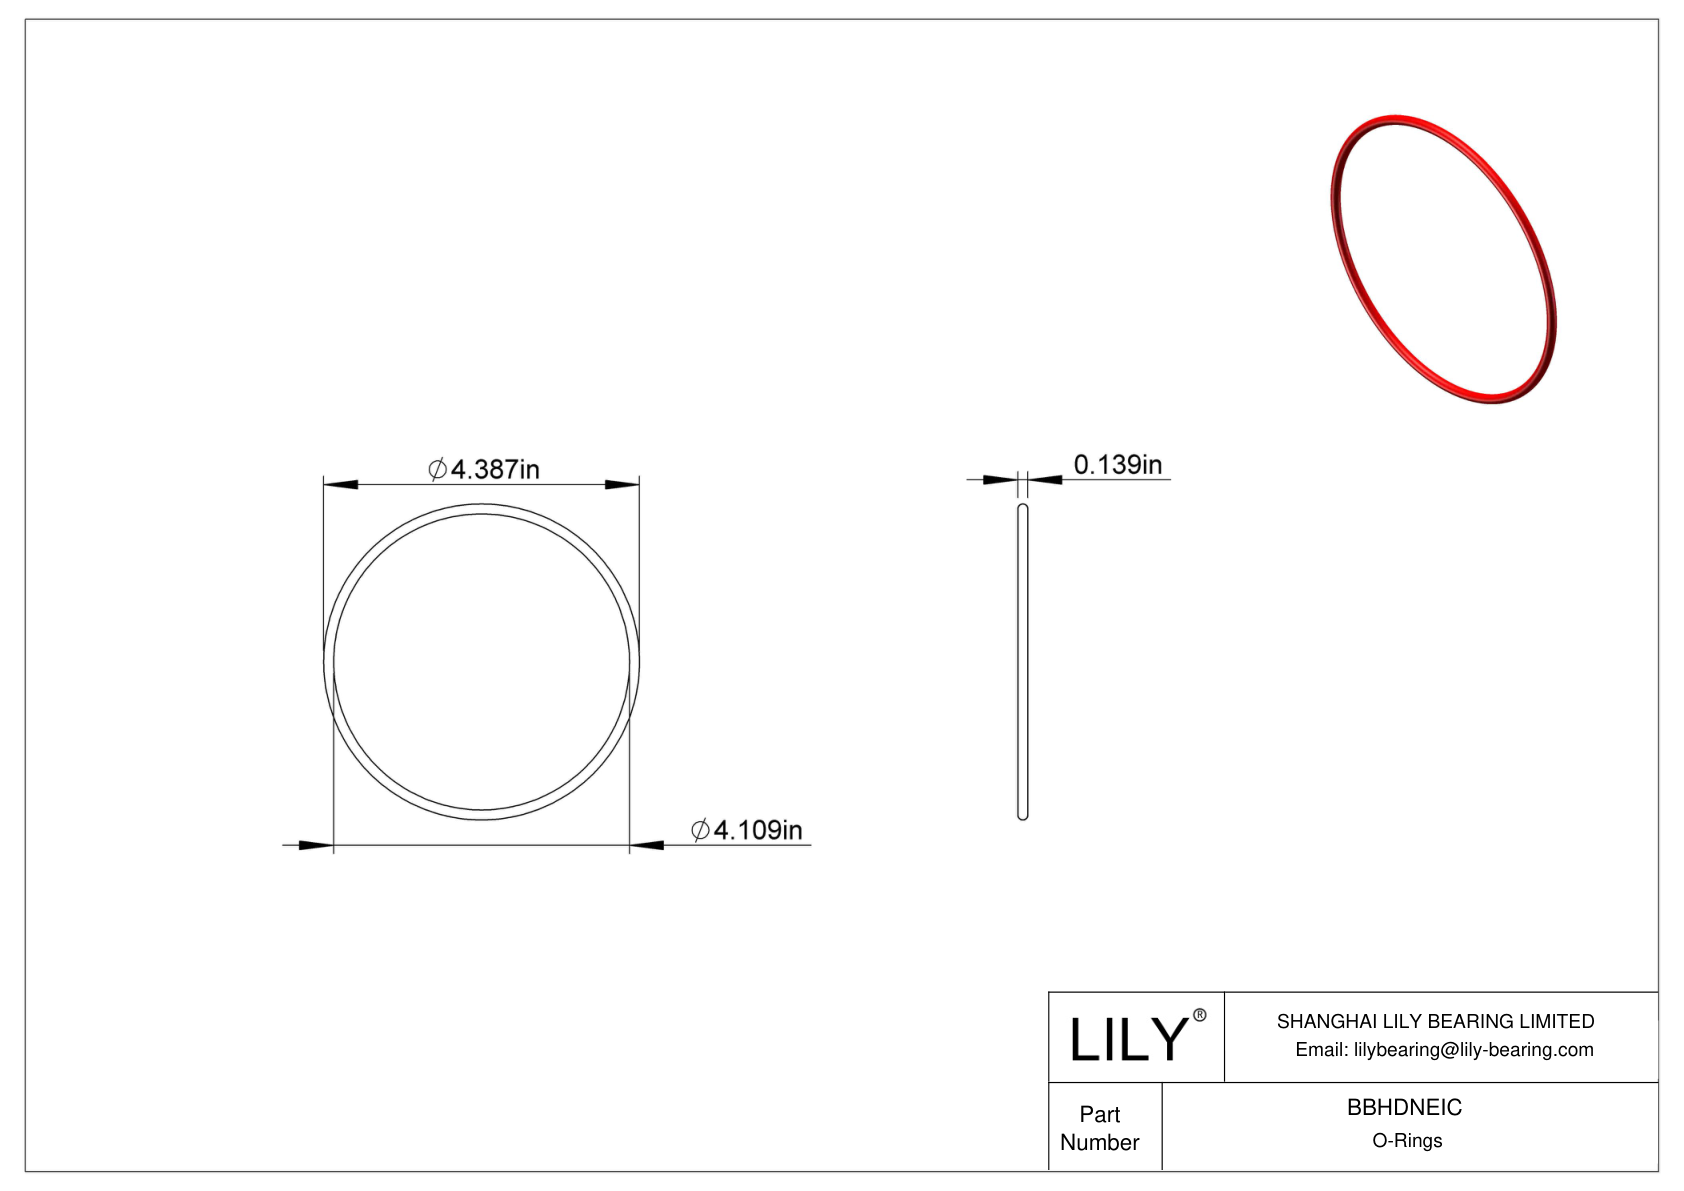 BBHDNEIC High Temperature O-Rings Round cad drawing